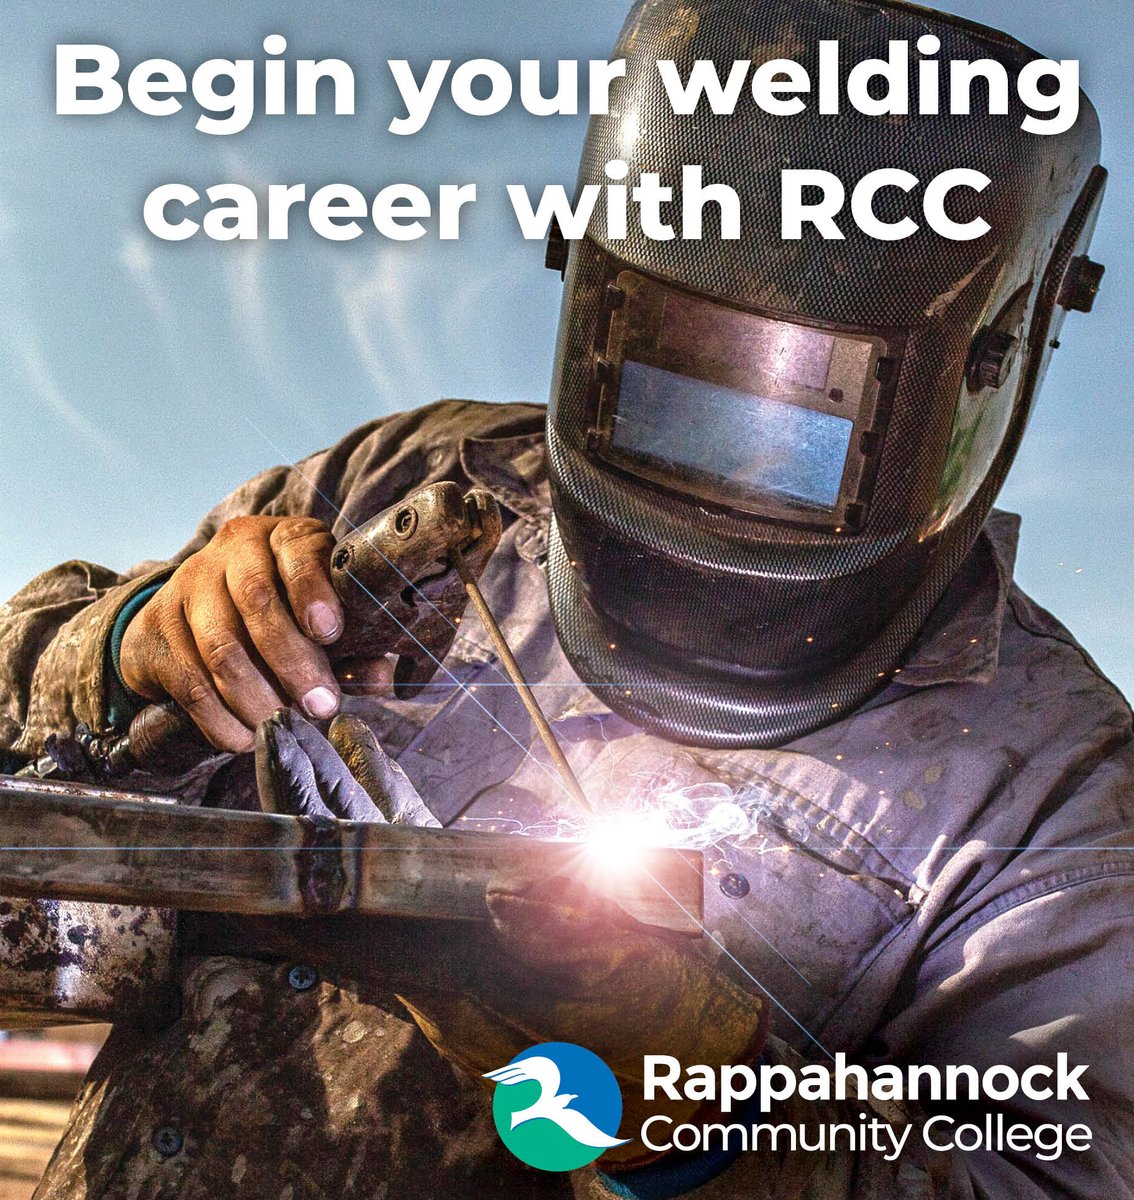 Now enrolling #welding students at #RCC’s newly constructed state-of-the-art welding labs in #NewKent! Classes begin in May with several schedules to choose from. Welding classes are also offered in Glenns & Montross. rappahannock.edu/workforce advisor@rappahannock.edu 804-758-6730